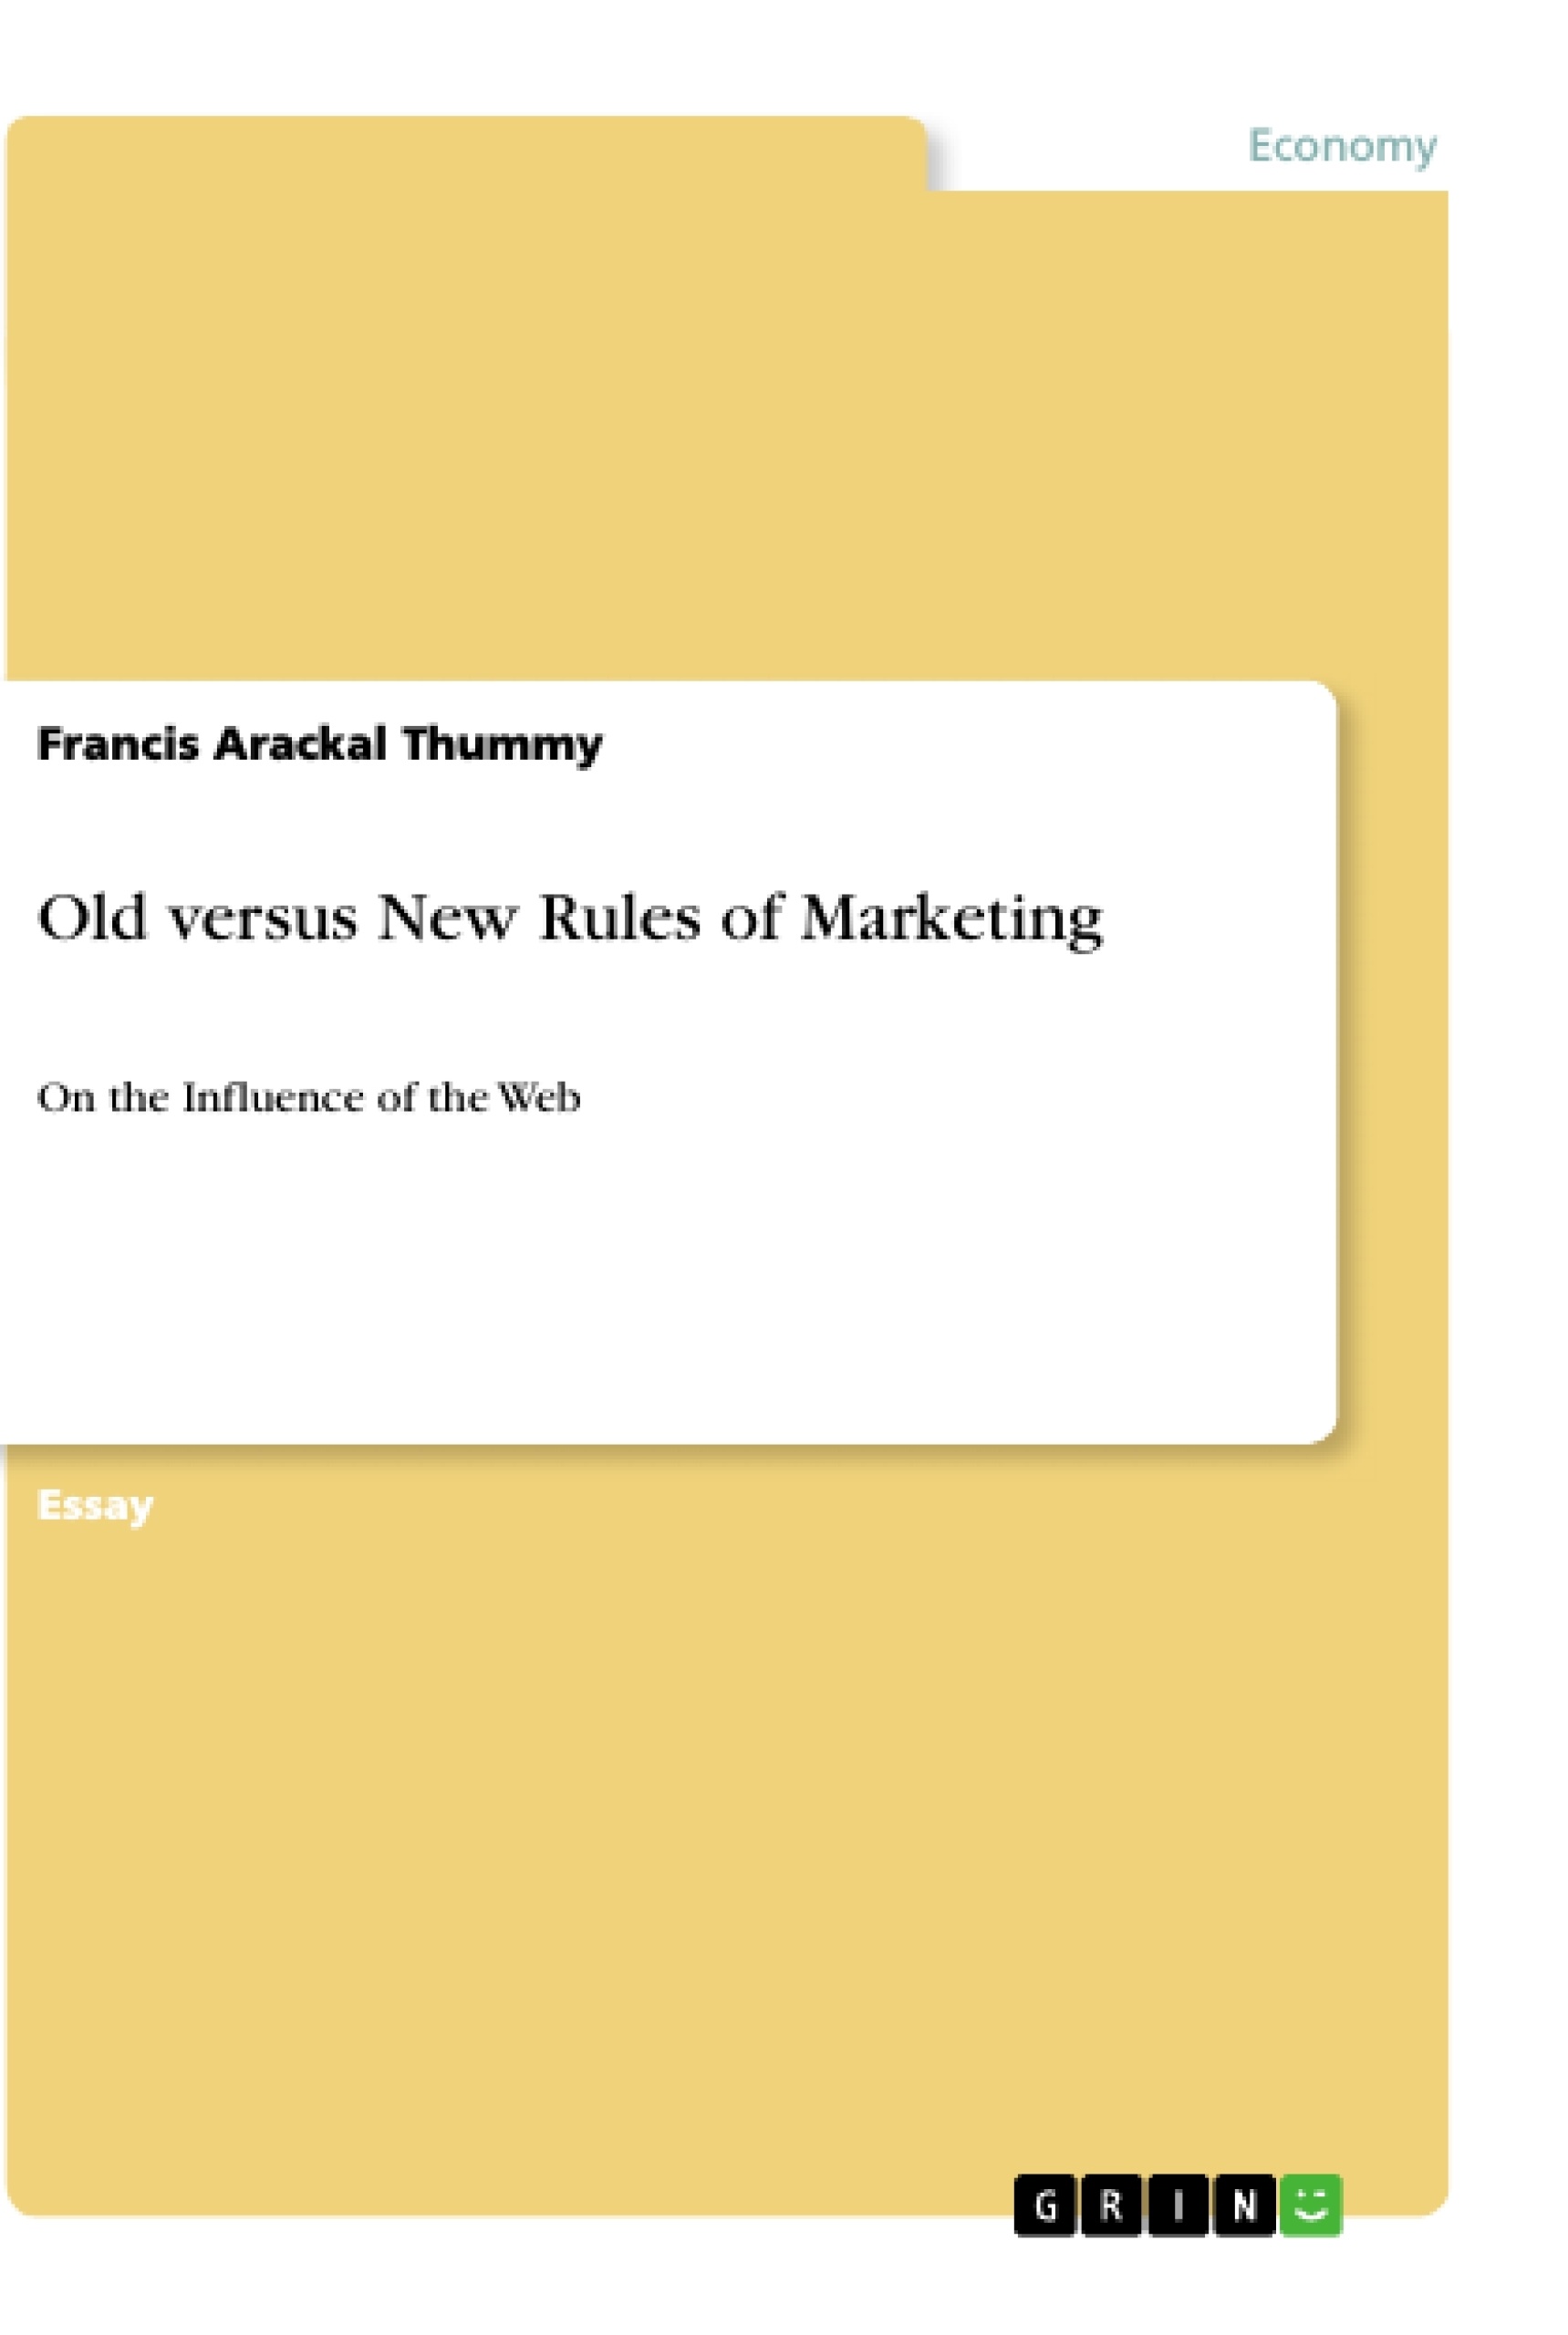 Title: Old versus New Rules of Marketing